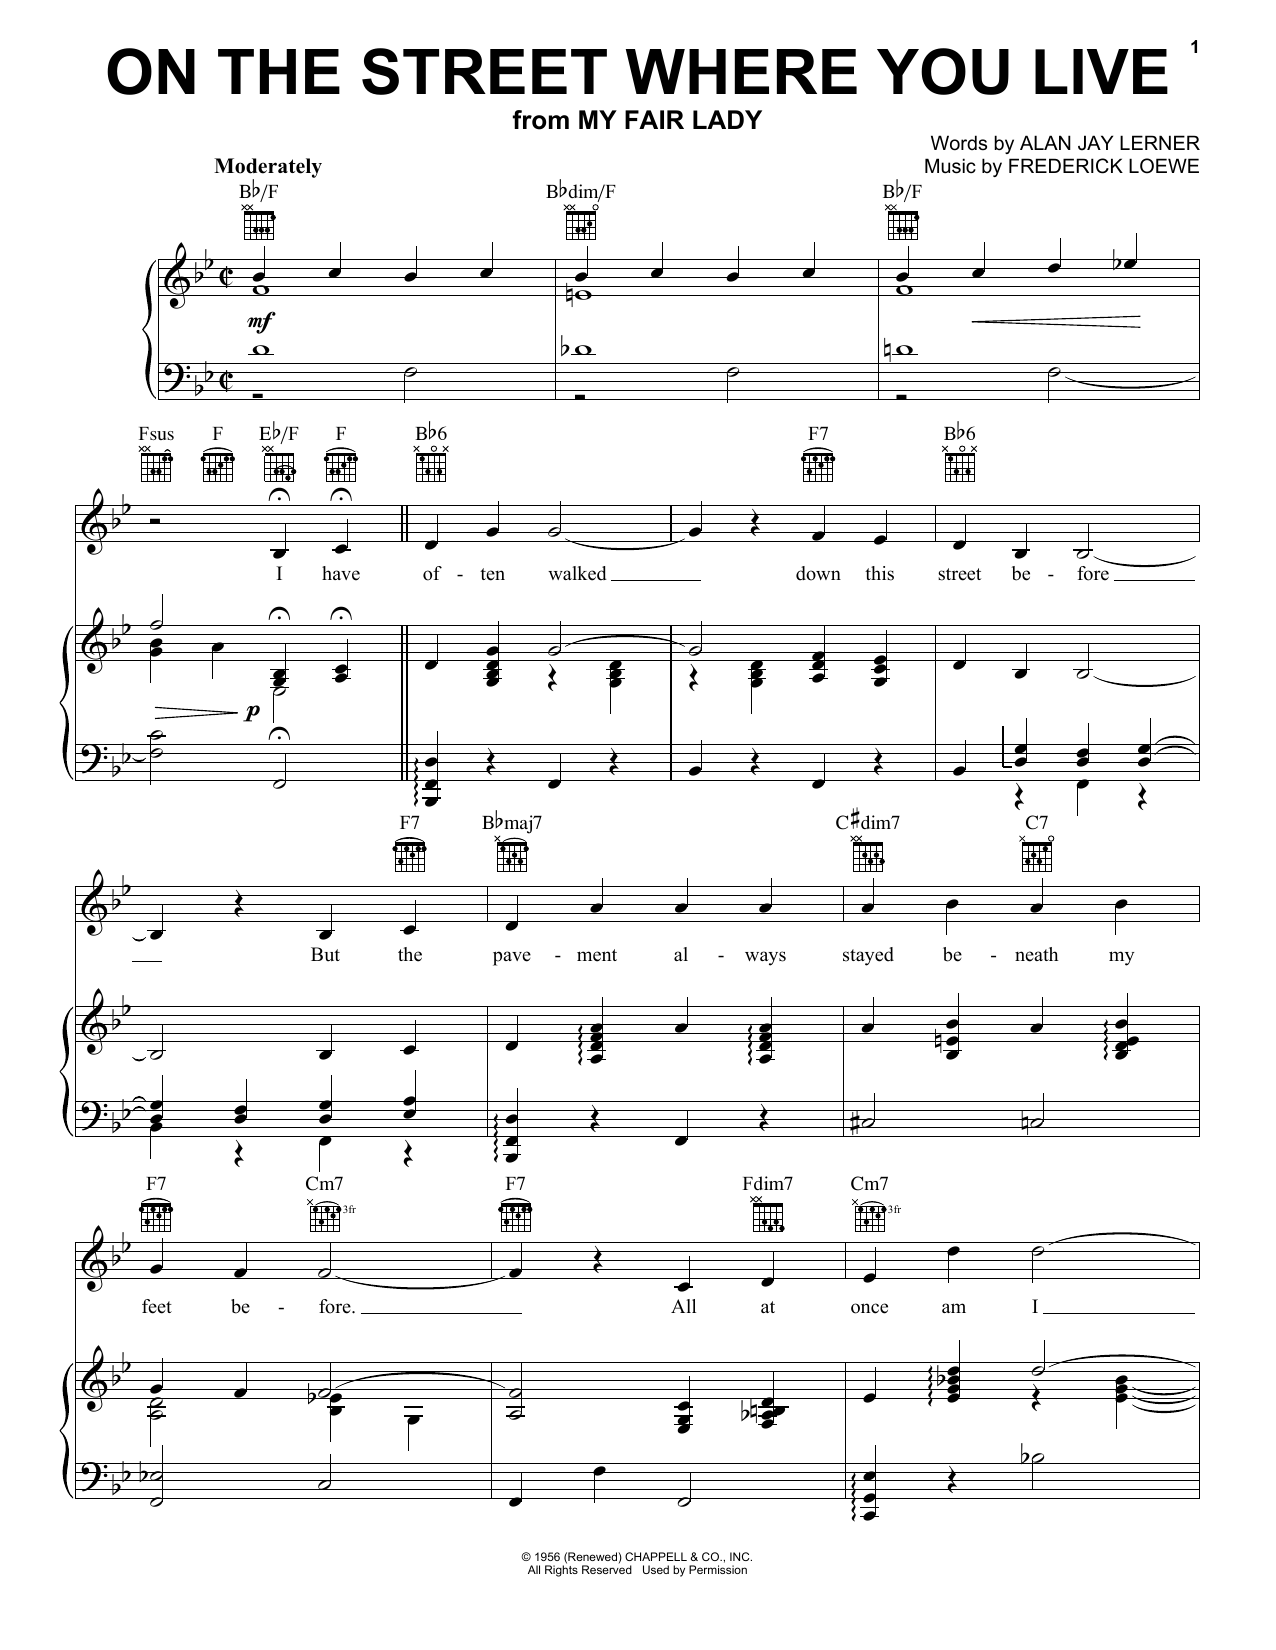 Lerner & Loewe On The Street Where You Live sheet music notes printable PDF score